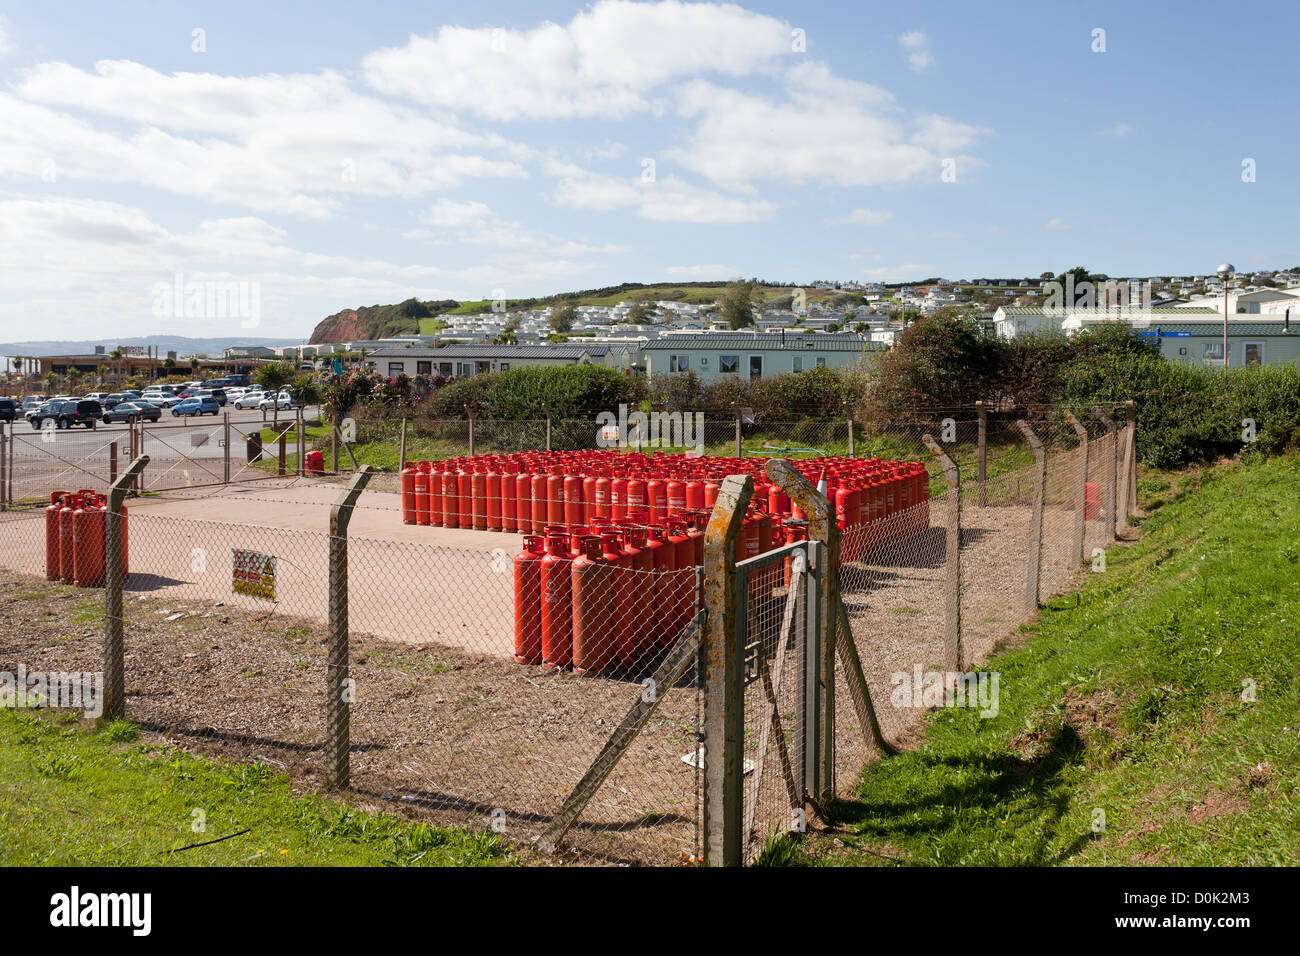 Propane gas cylinders stocked near holiday caravans on Sandy Bay in the South West of the UK Stock Photo